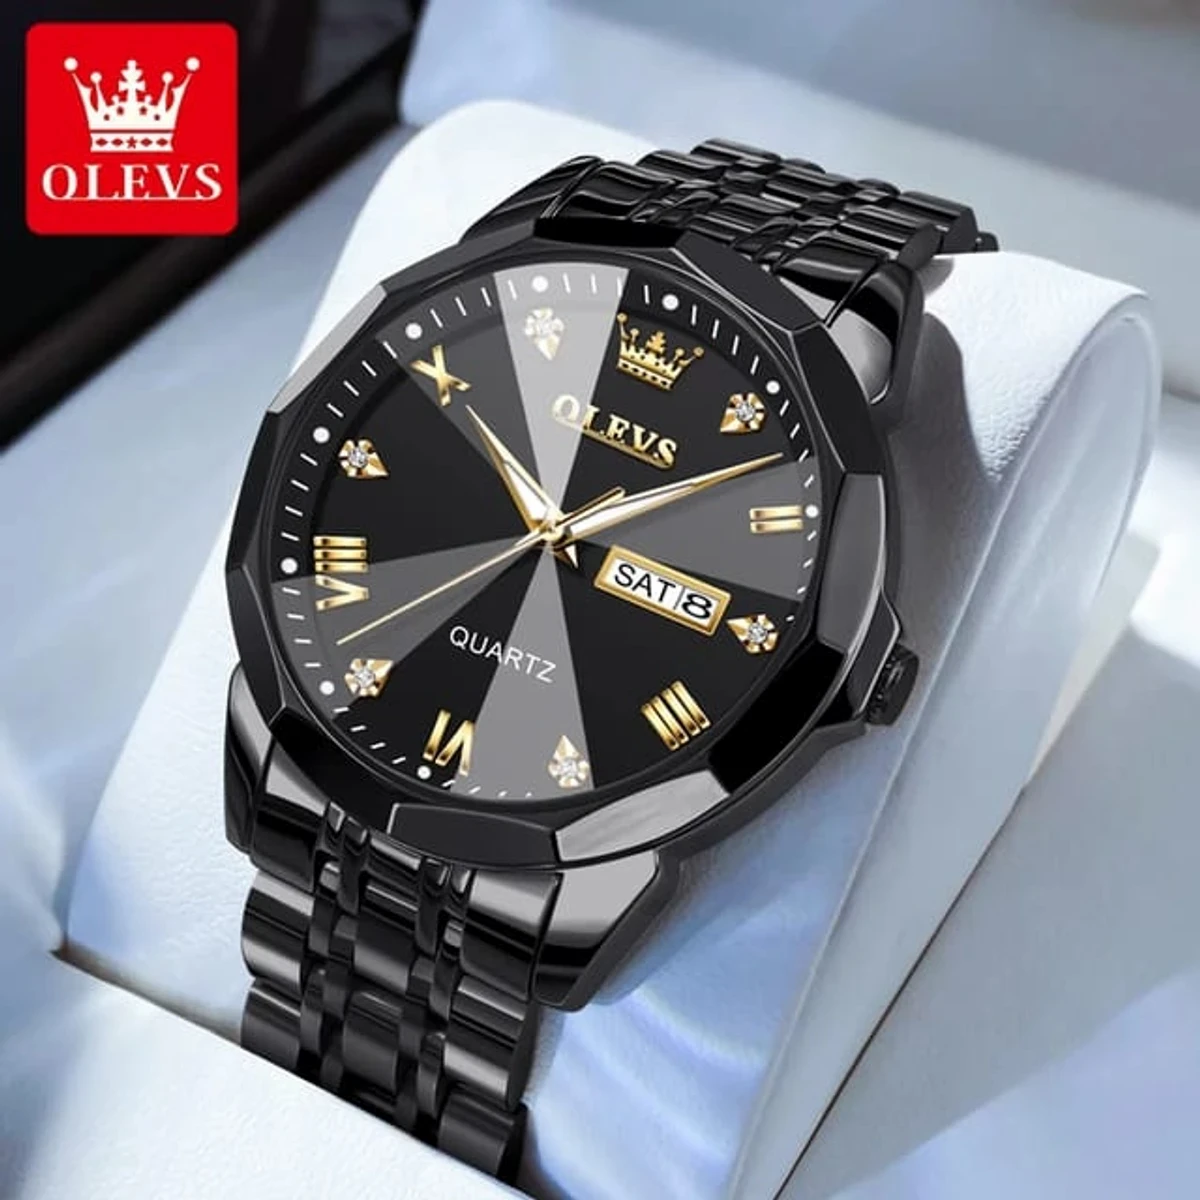 OLEVS MODEL 9931 Watch for Men Stainless Steel  Watches - 9941 FULL BLACK- MAN  WATCH